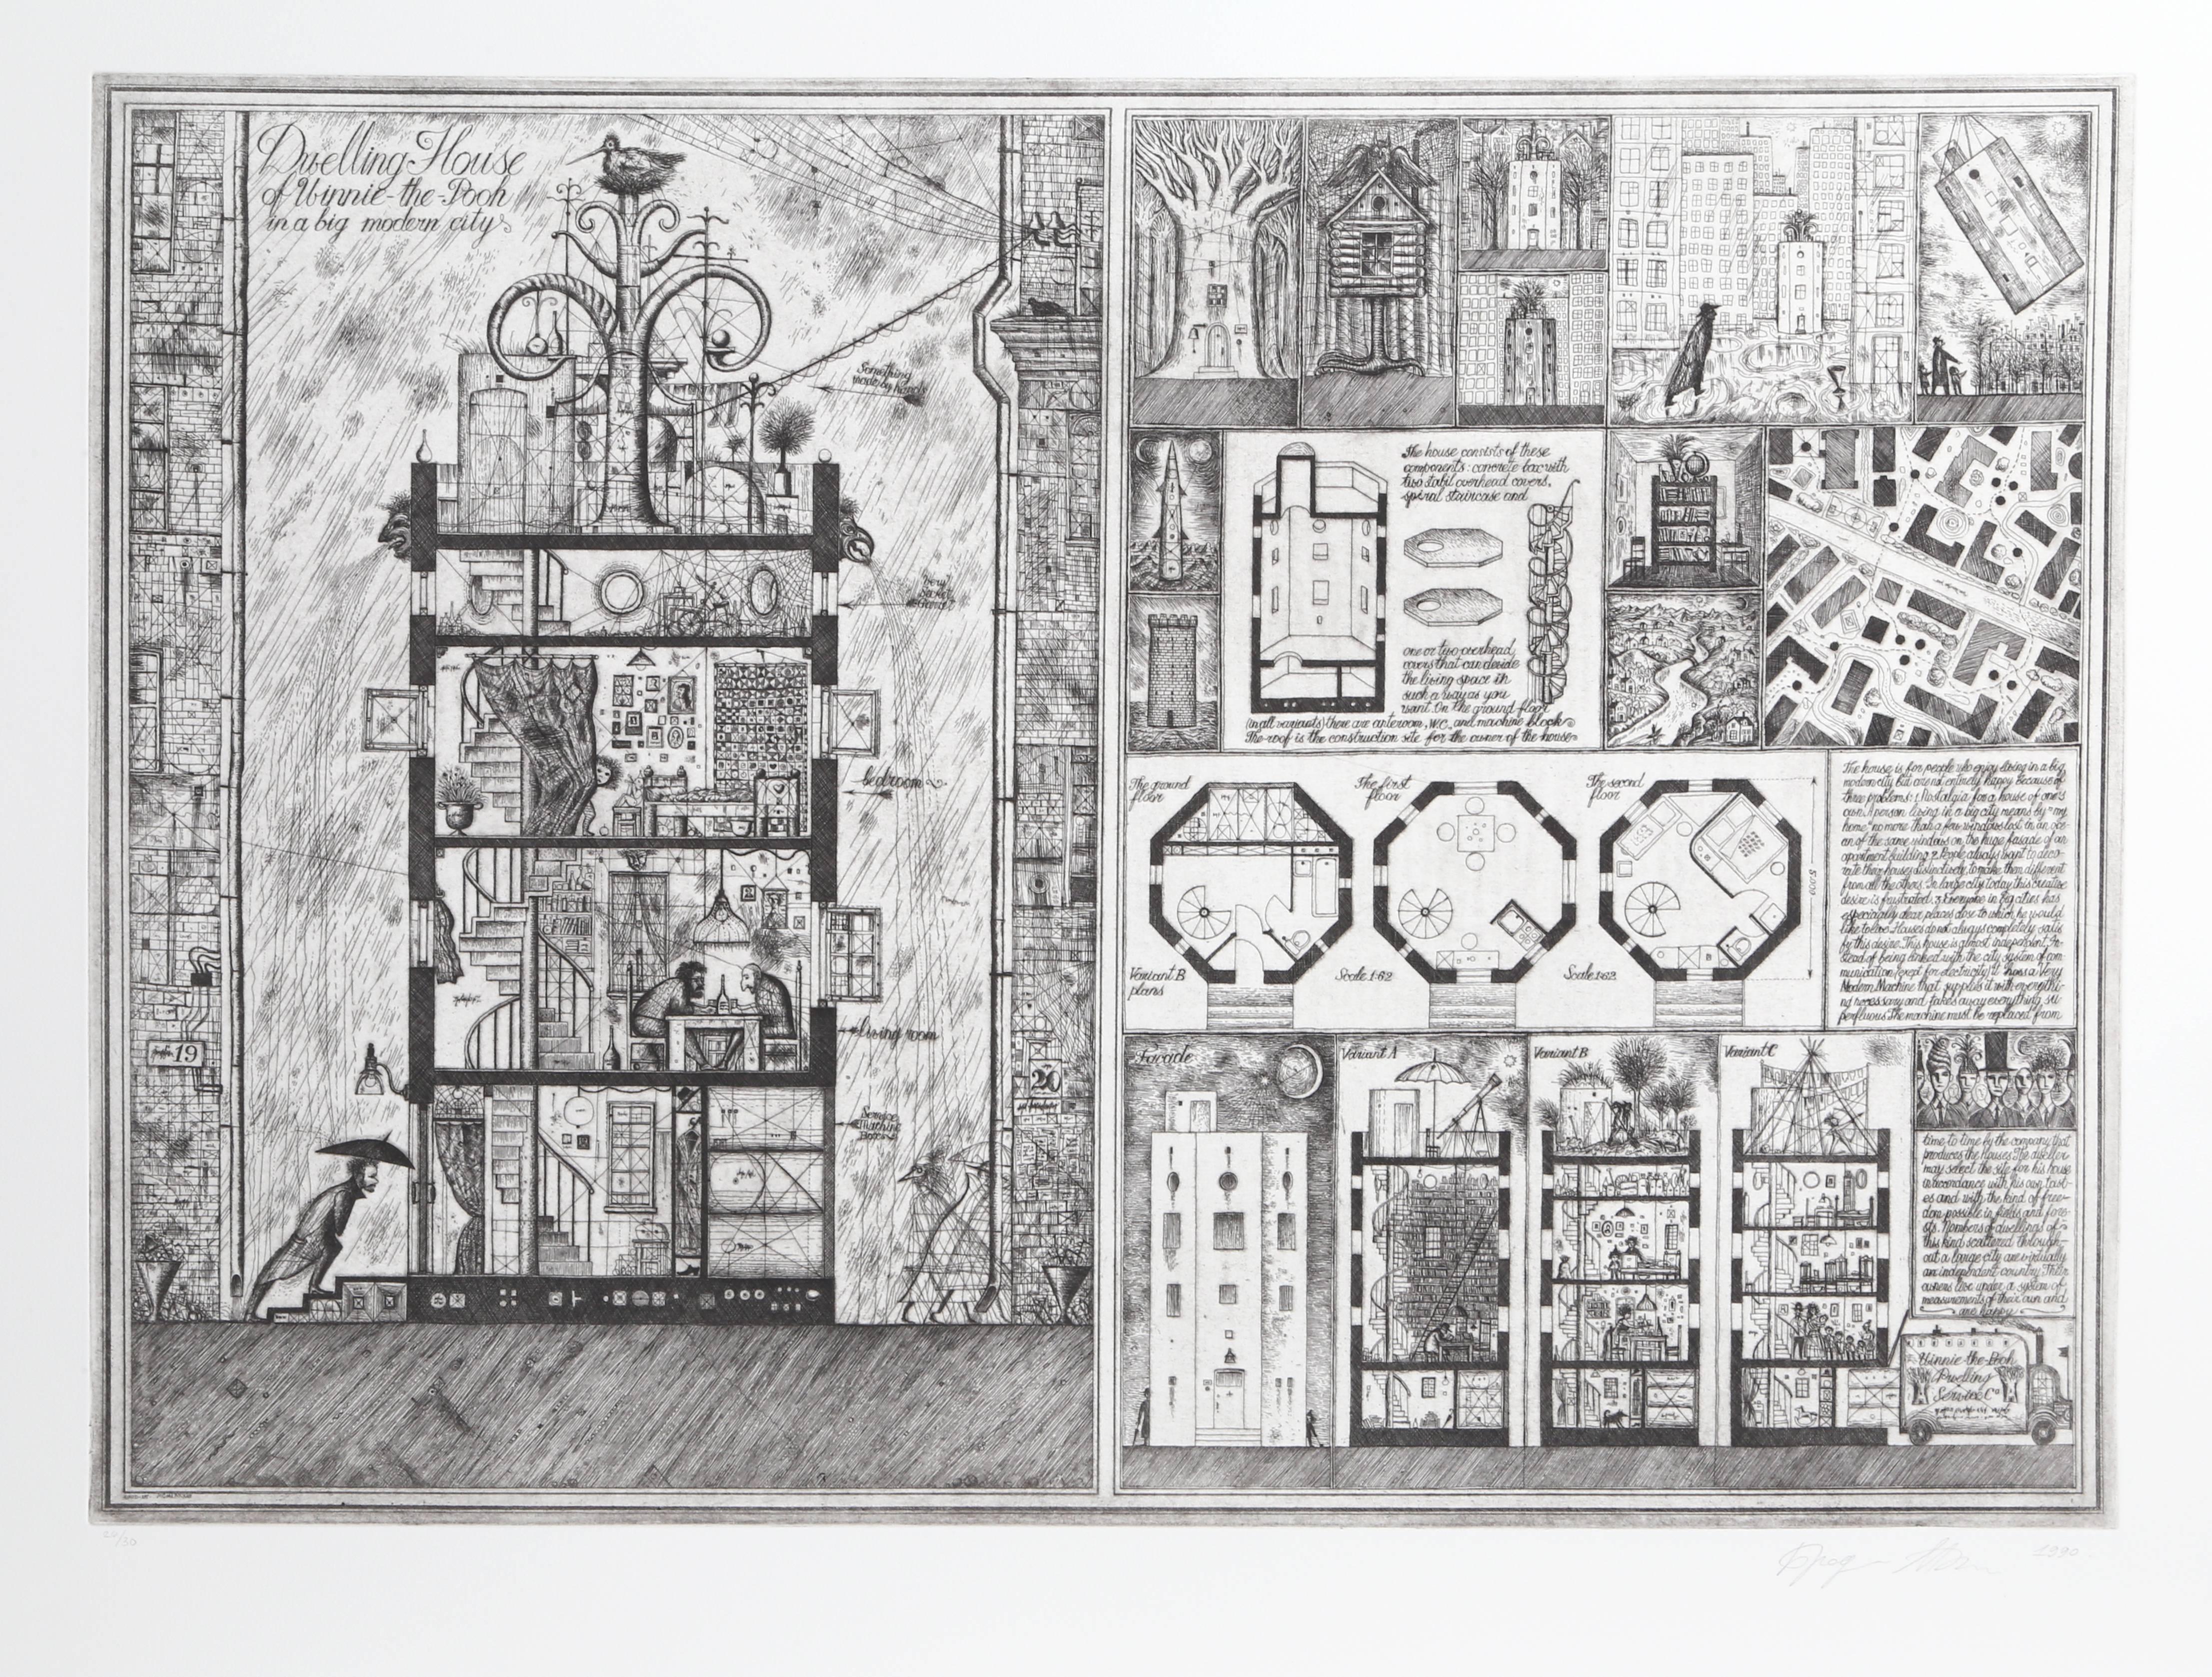 Alexander Brodsky and Ilya Utkin Interior Print - Dwelling House of Winnie the Pooh from Brodsky and Utkin: Projects 1981 - 1990